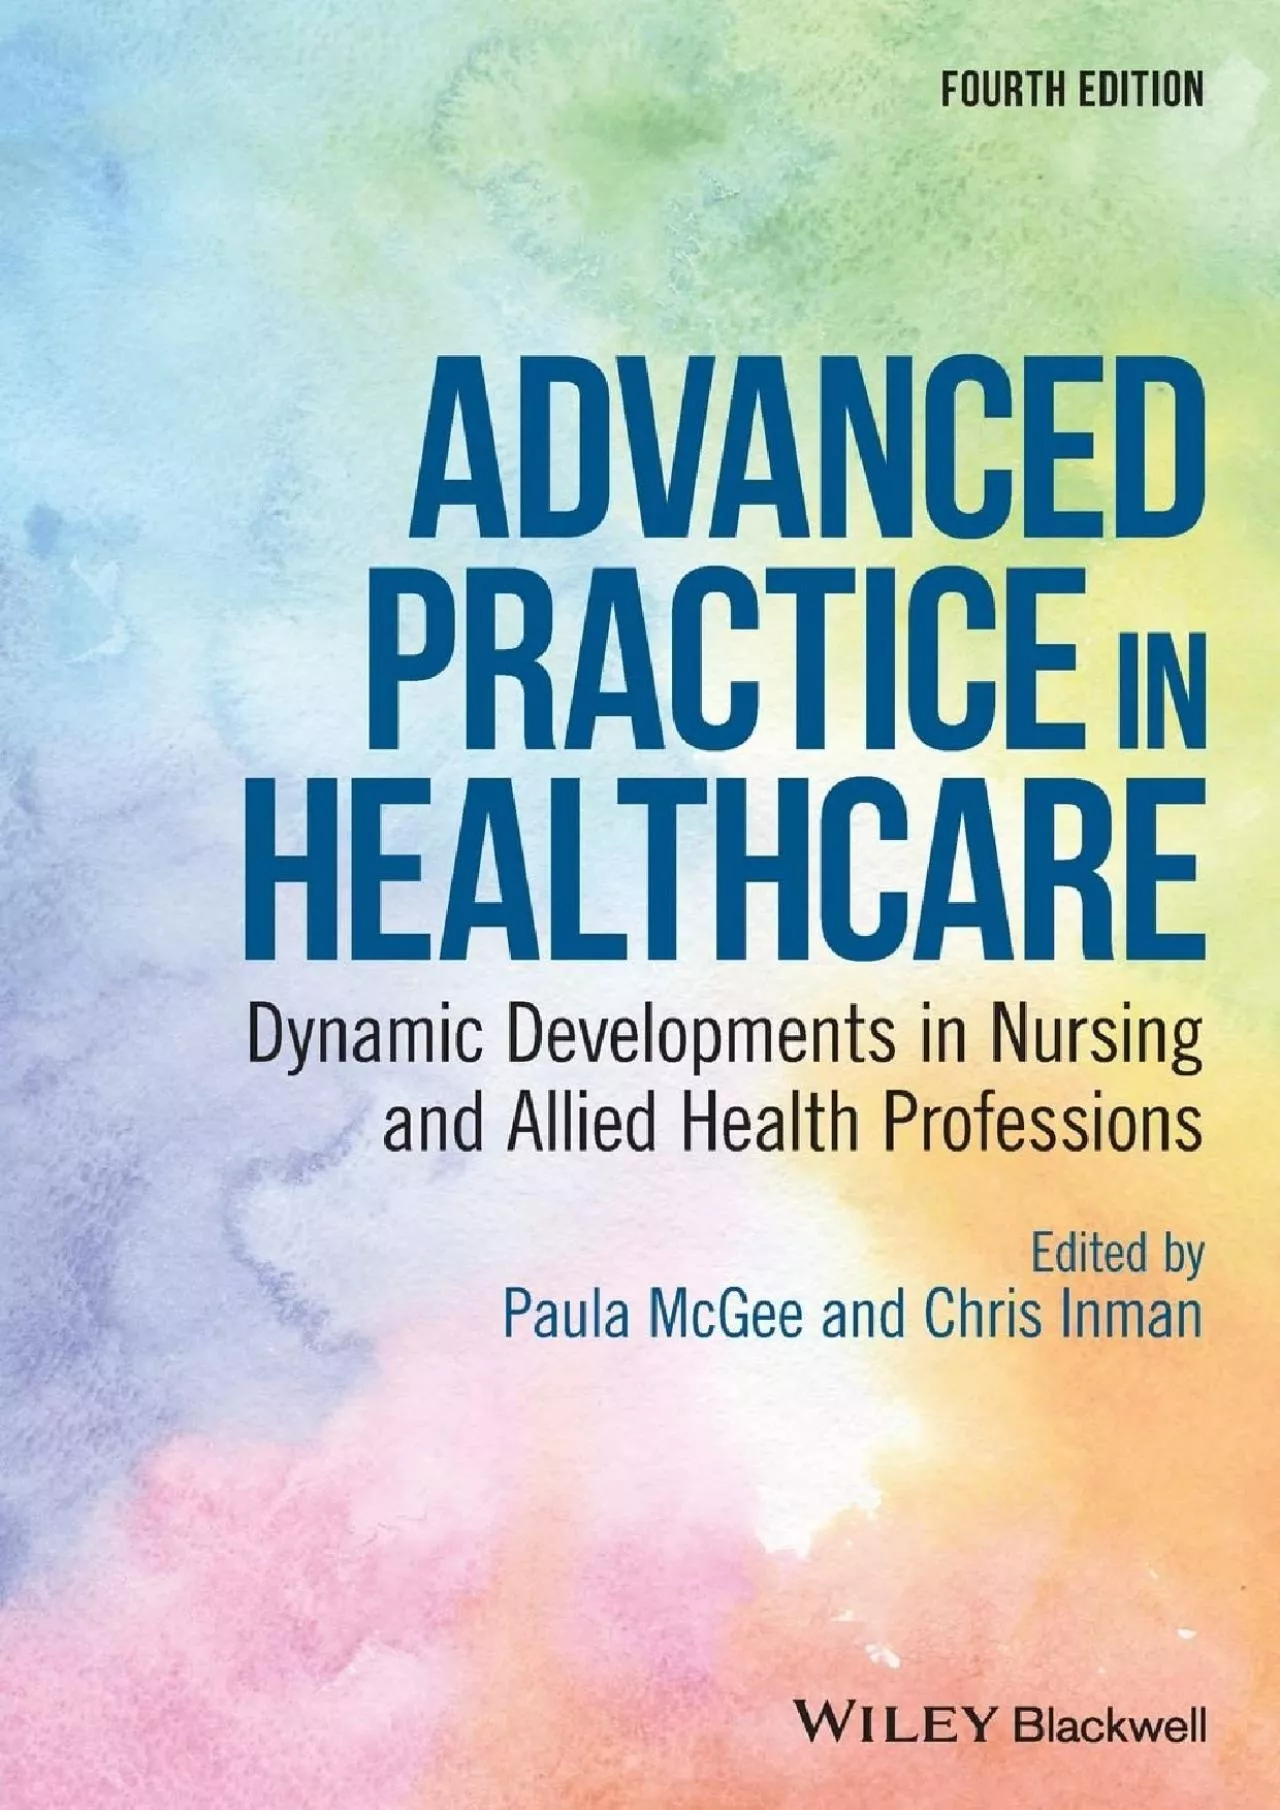 (EBOOK)-Advanced Practice in Healthcare: Dynamic Developments in Nursing and Allied Health